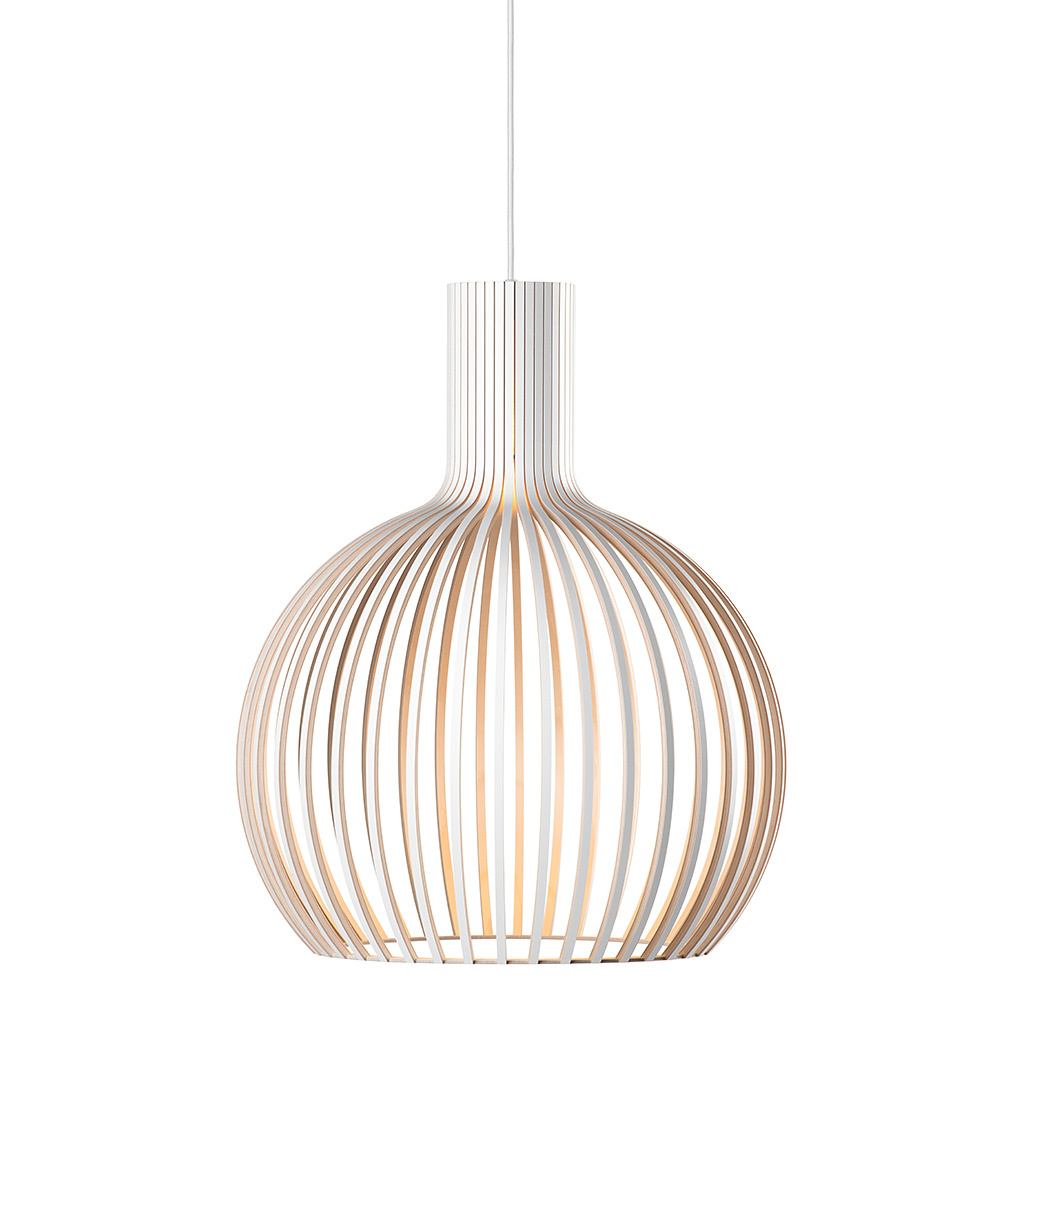 Octo Small 4241 pendant lamp is available in white laminated